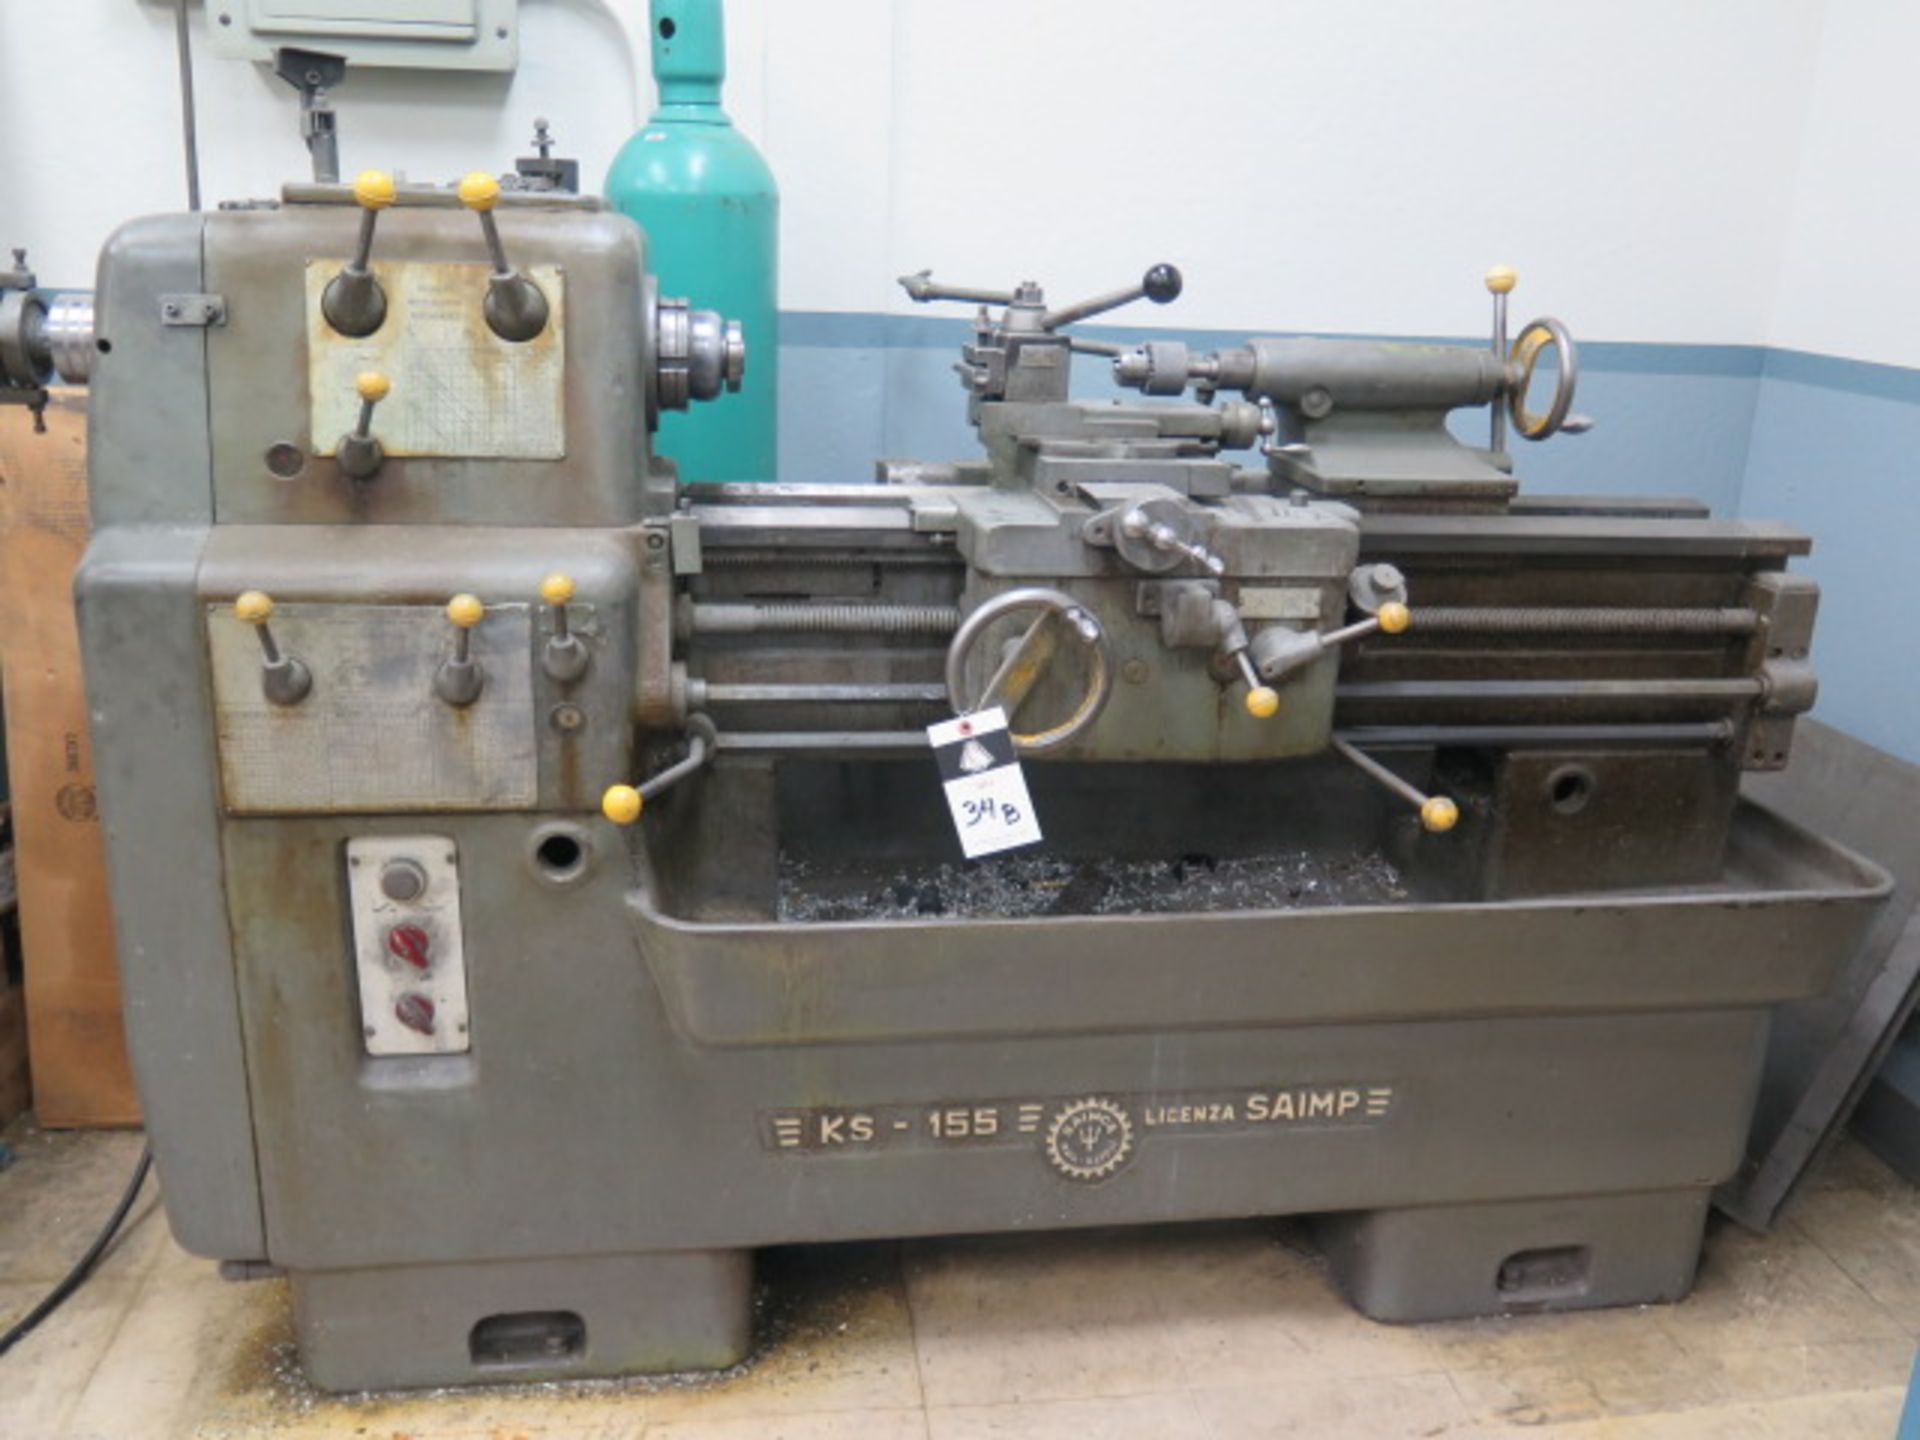 Saimp KS-155 Geared Head Lathe s/n 2636 w/ 45-1500 RPM, Inch/mm Threading, Tailstock, SOLD AS IS